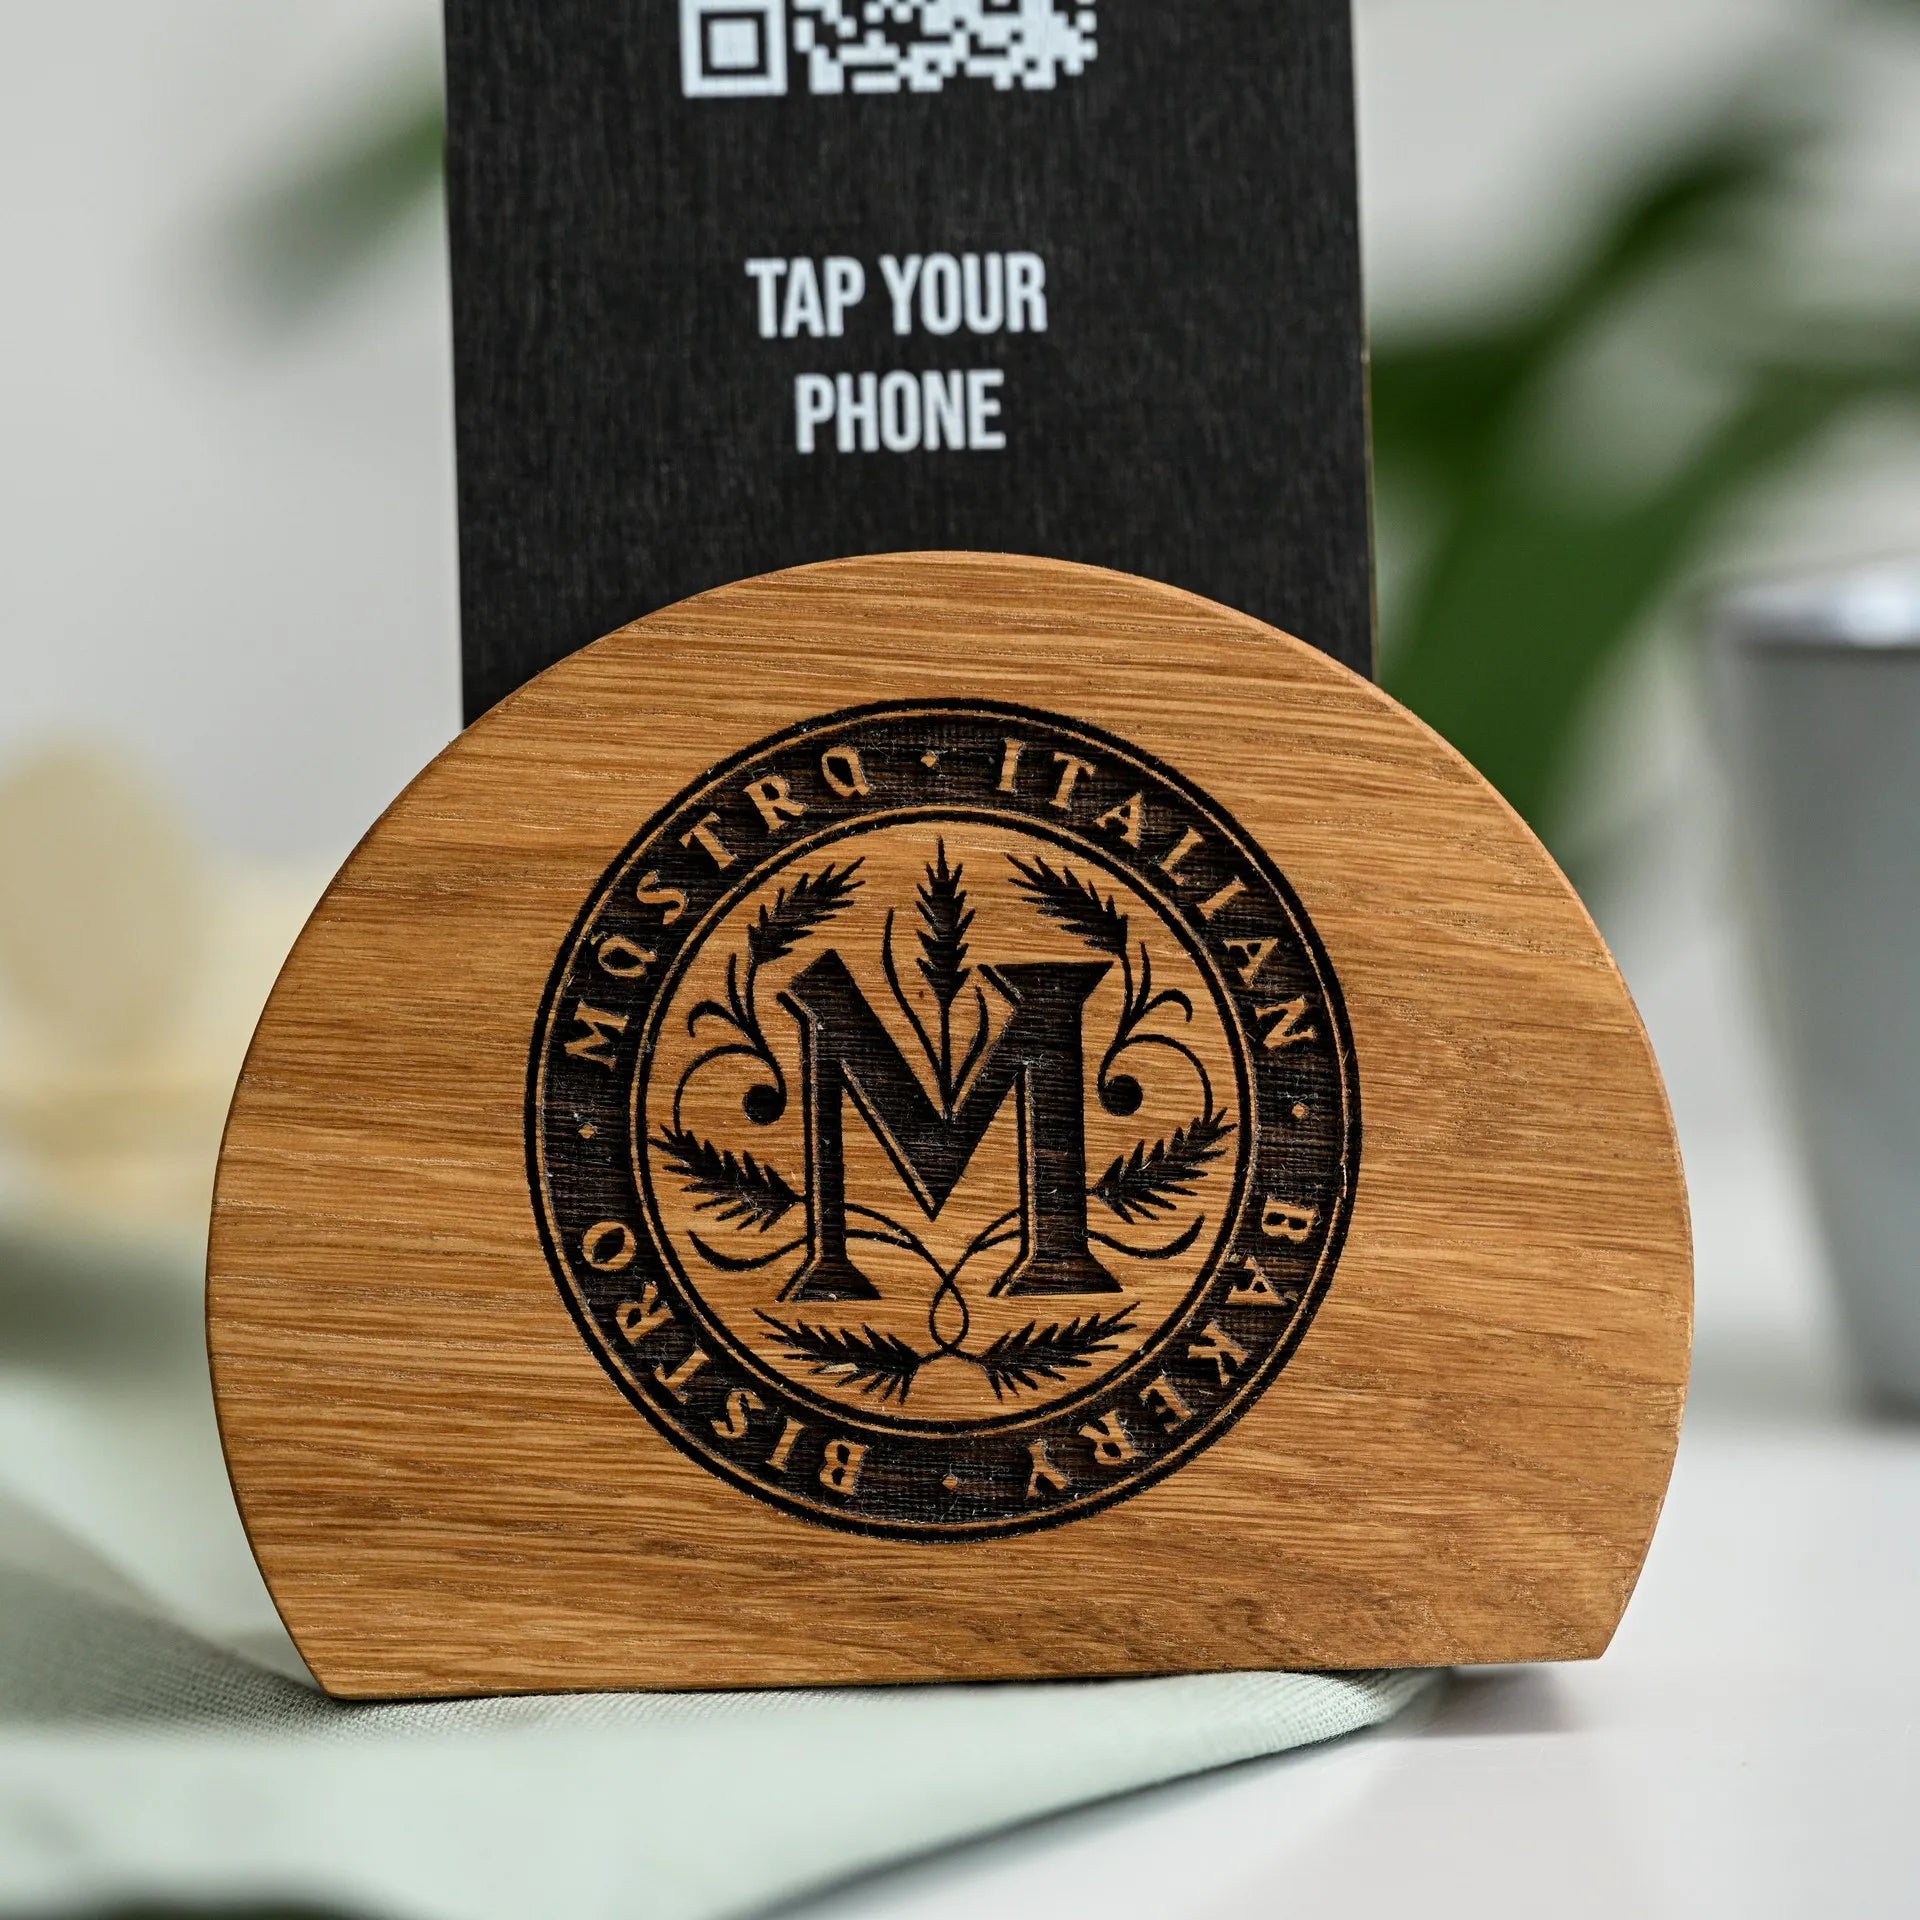 Make information accessible and interactive with our NFC tag and QR code sign mounted on a sophisticated wooden stand, inviting patrons to explore.